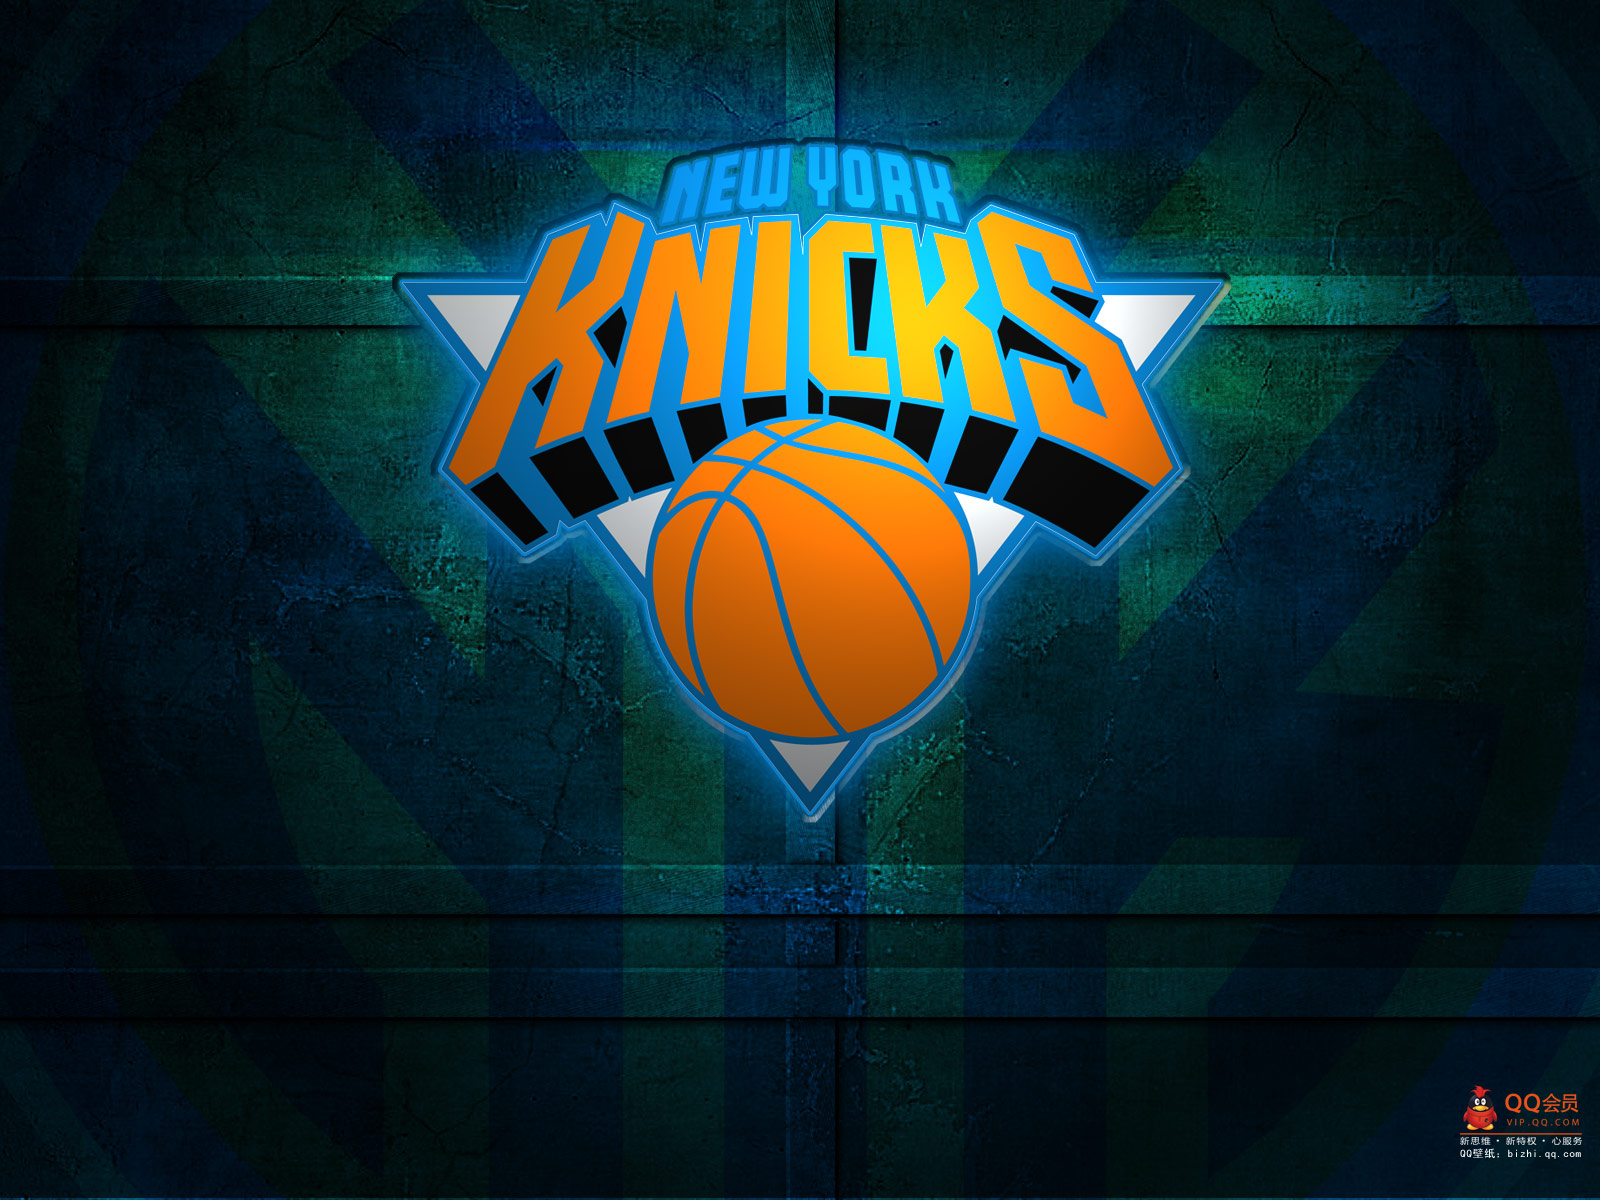 Free download New York Knicks Wallpaper High Resolution and Quality [1600x1200] for your Desktop, Mobile & Tablet. Explore Knicks Wallpaper. Carmelo Anthony Knicks Wallpaper, Kristaps Porzingis Knicks Wallpaper, Knicks iPhone Wallpaper